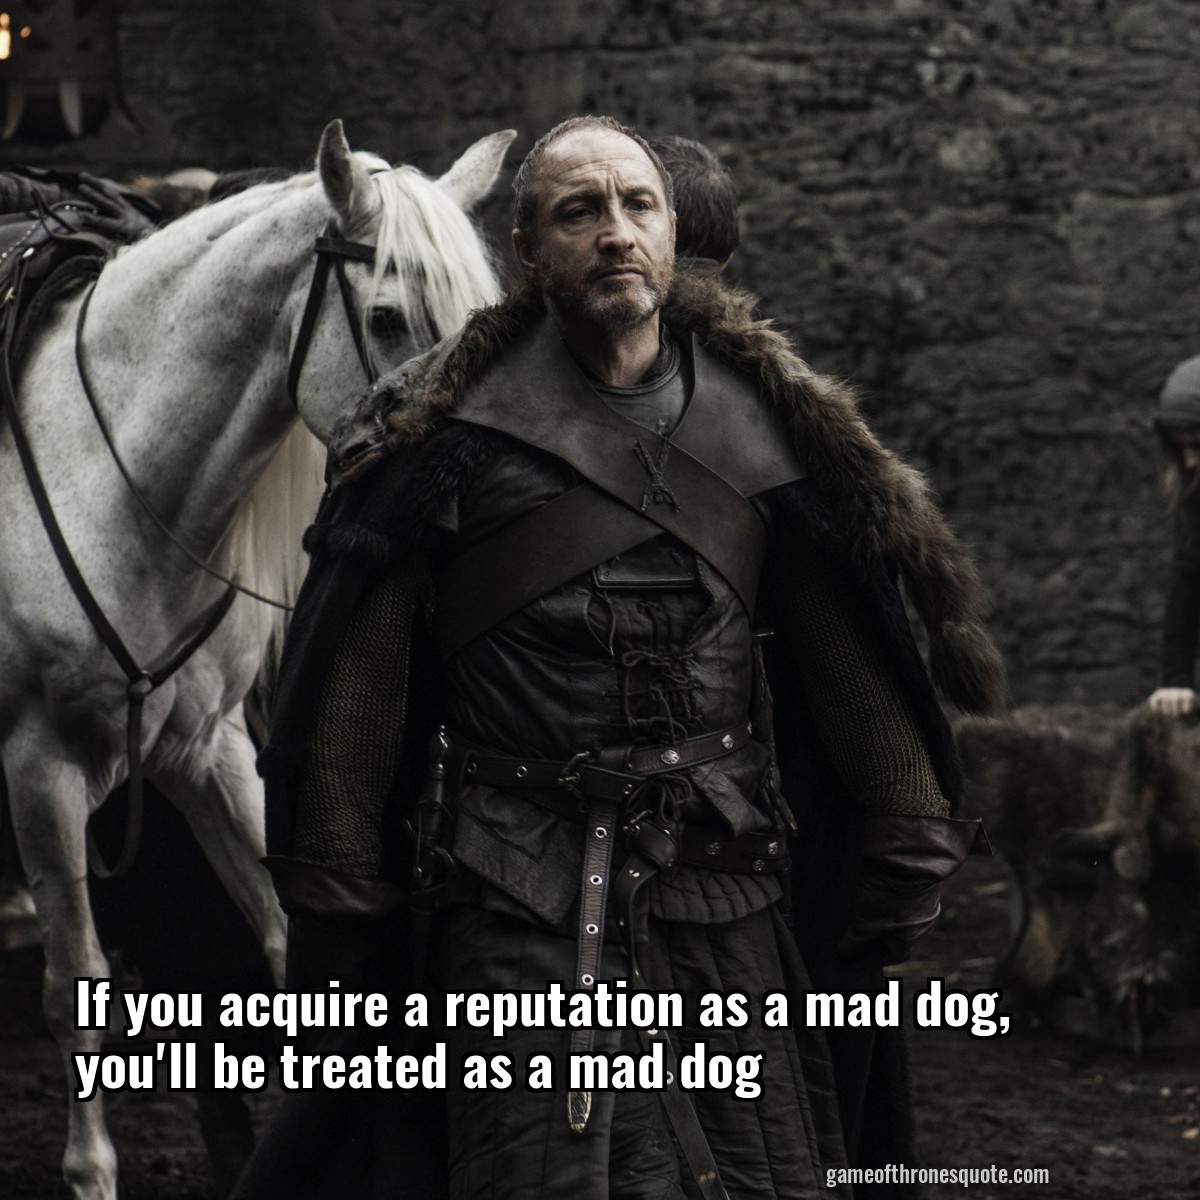 If you acquire a reputation as a mad dog, you'll be treated as a mad dog